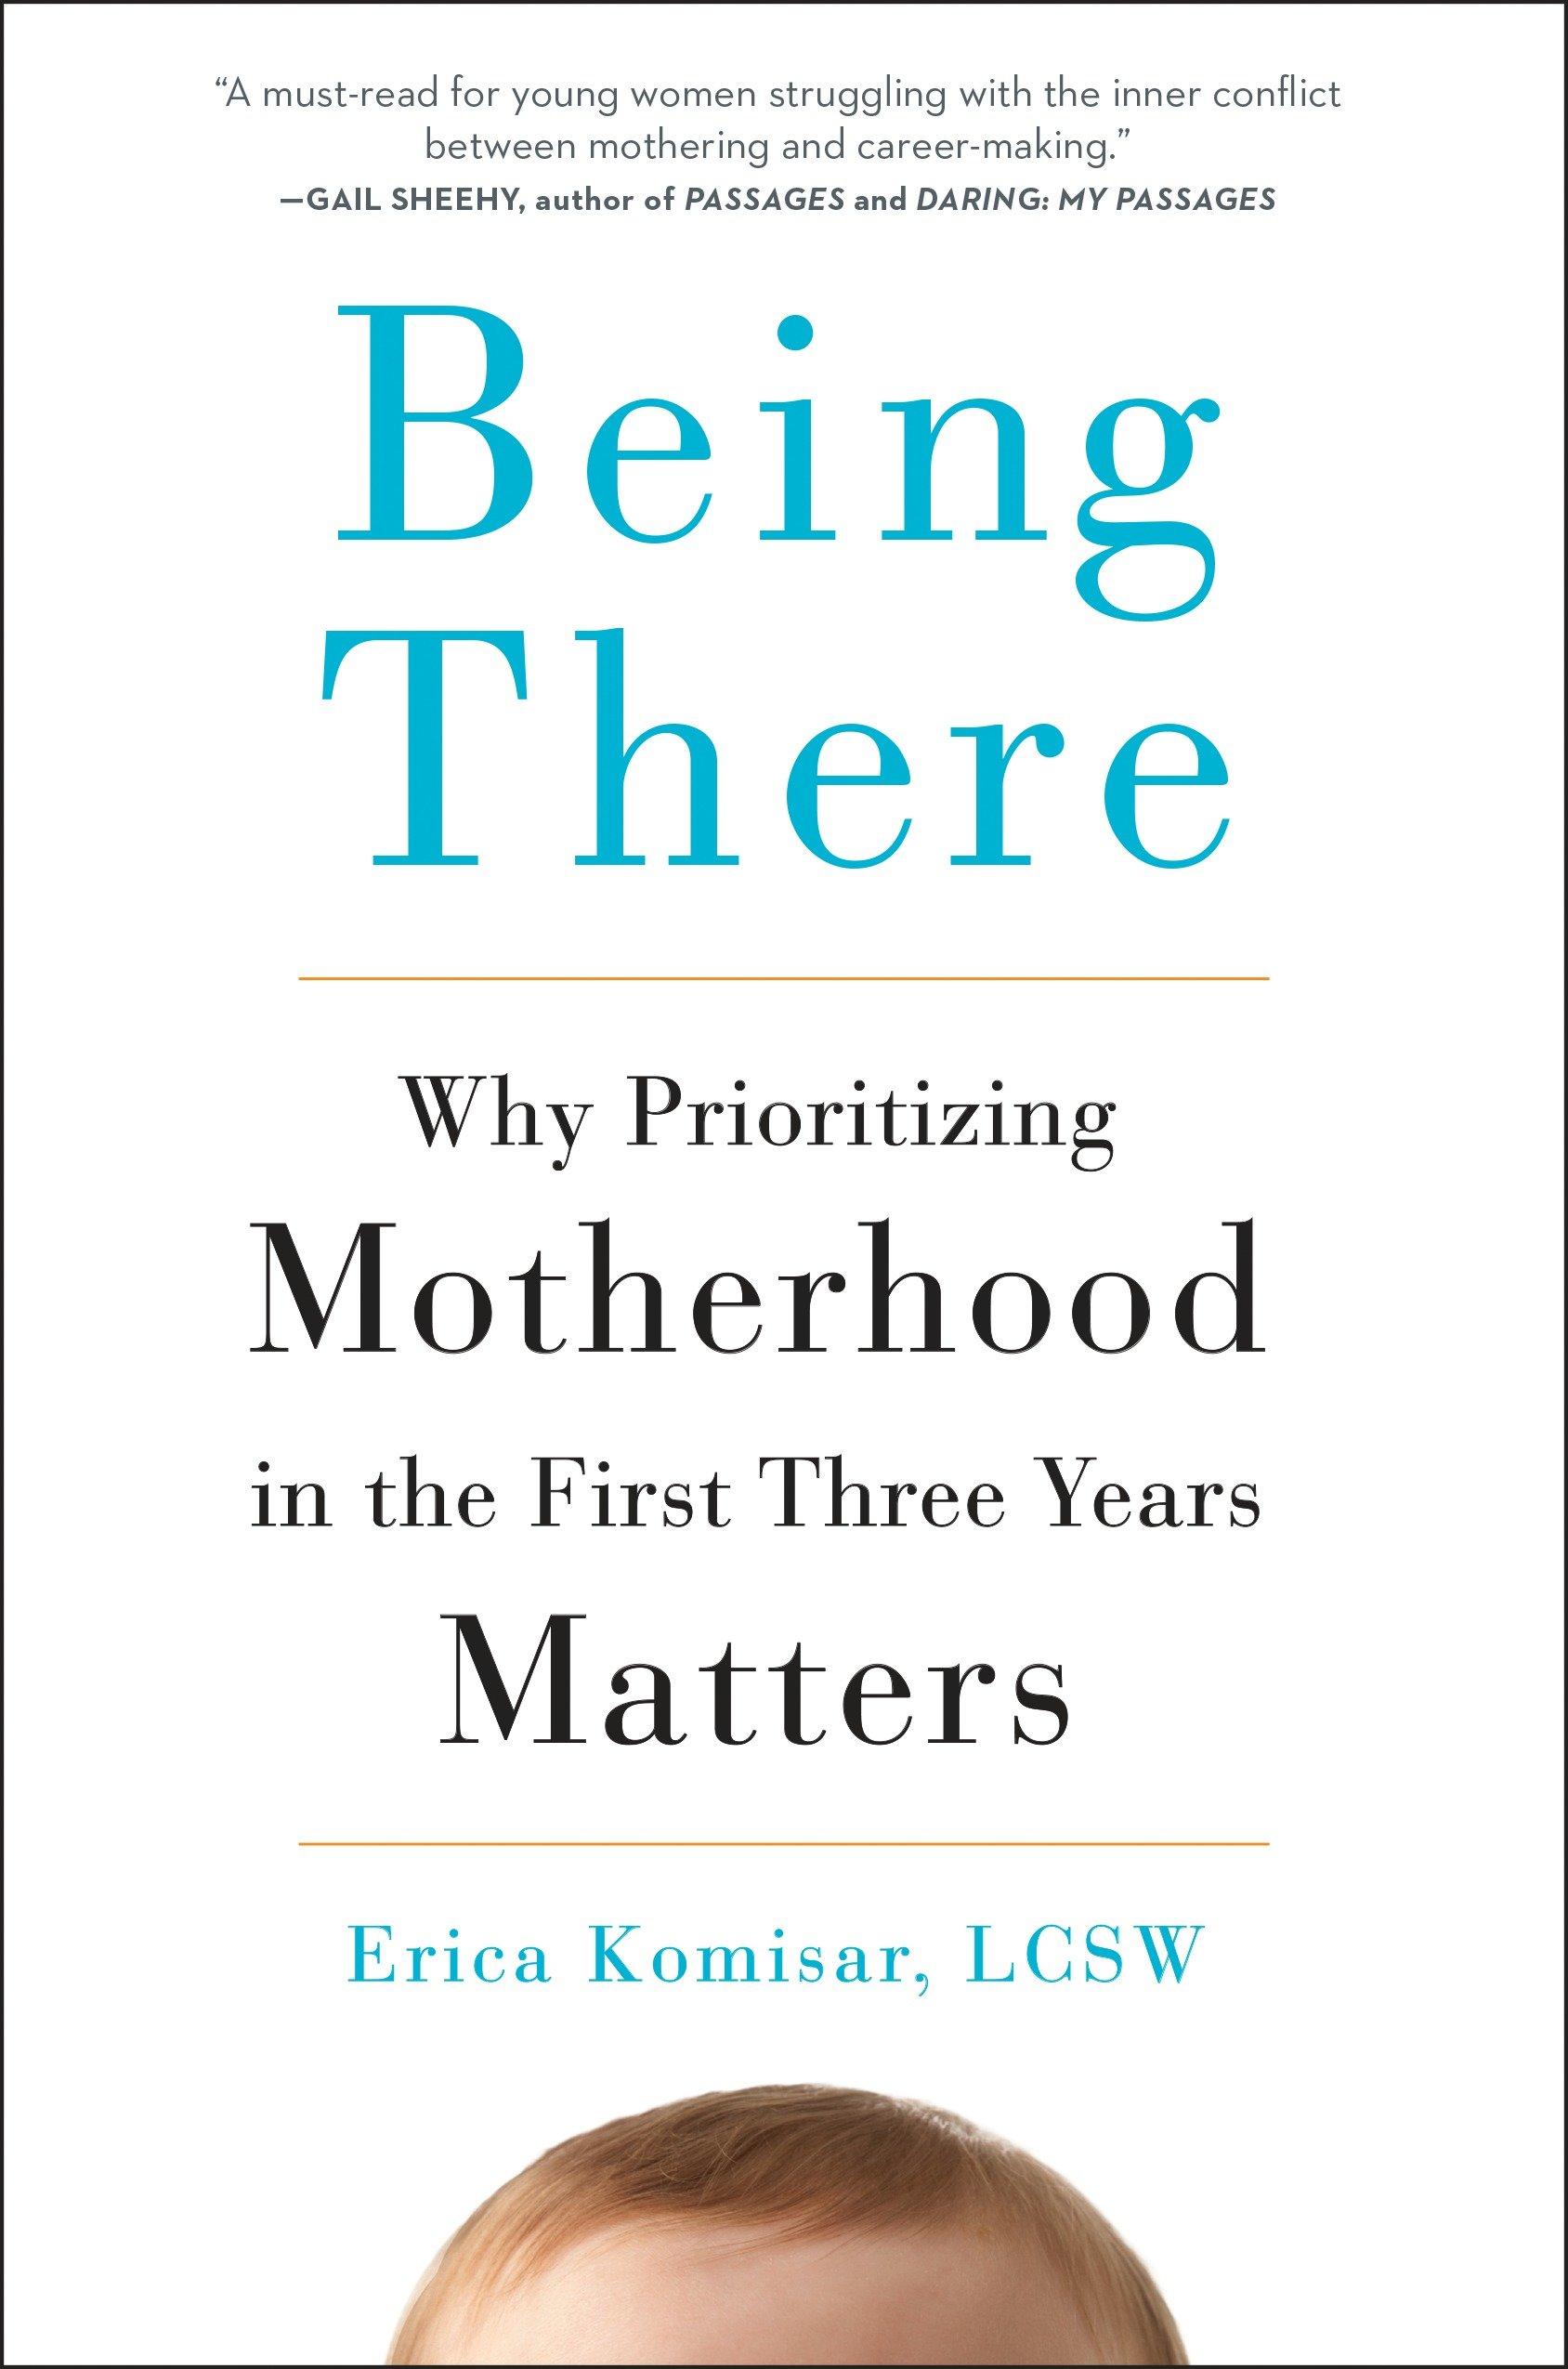 Being There / Why Prioritizing Motherhood in the First Three Years Matters / Erica Komisar / Buch / Einband - fest (Hardcover) / Englisch / 2017 / Penguin Publishing Group / EAN 9780143109297 - Komisar, Erica